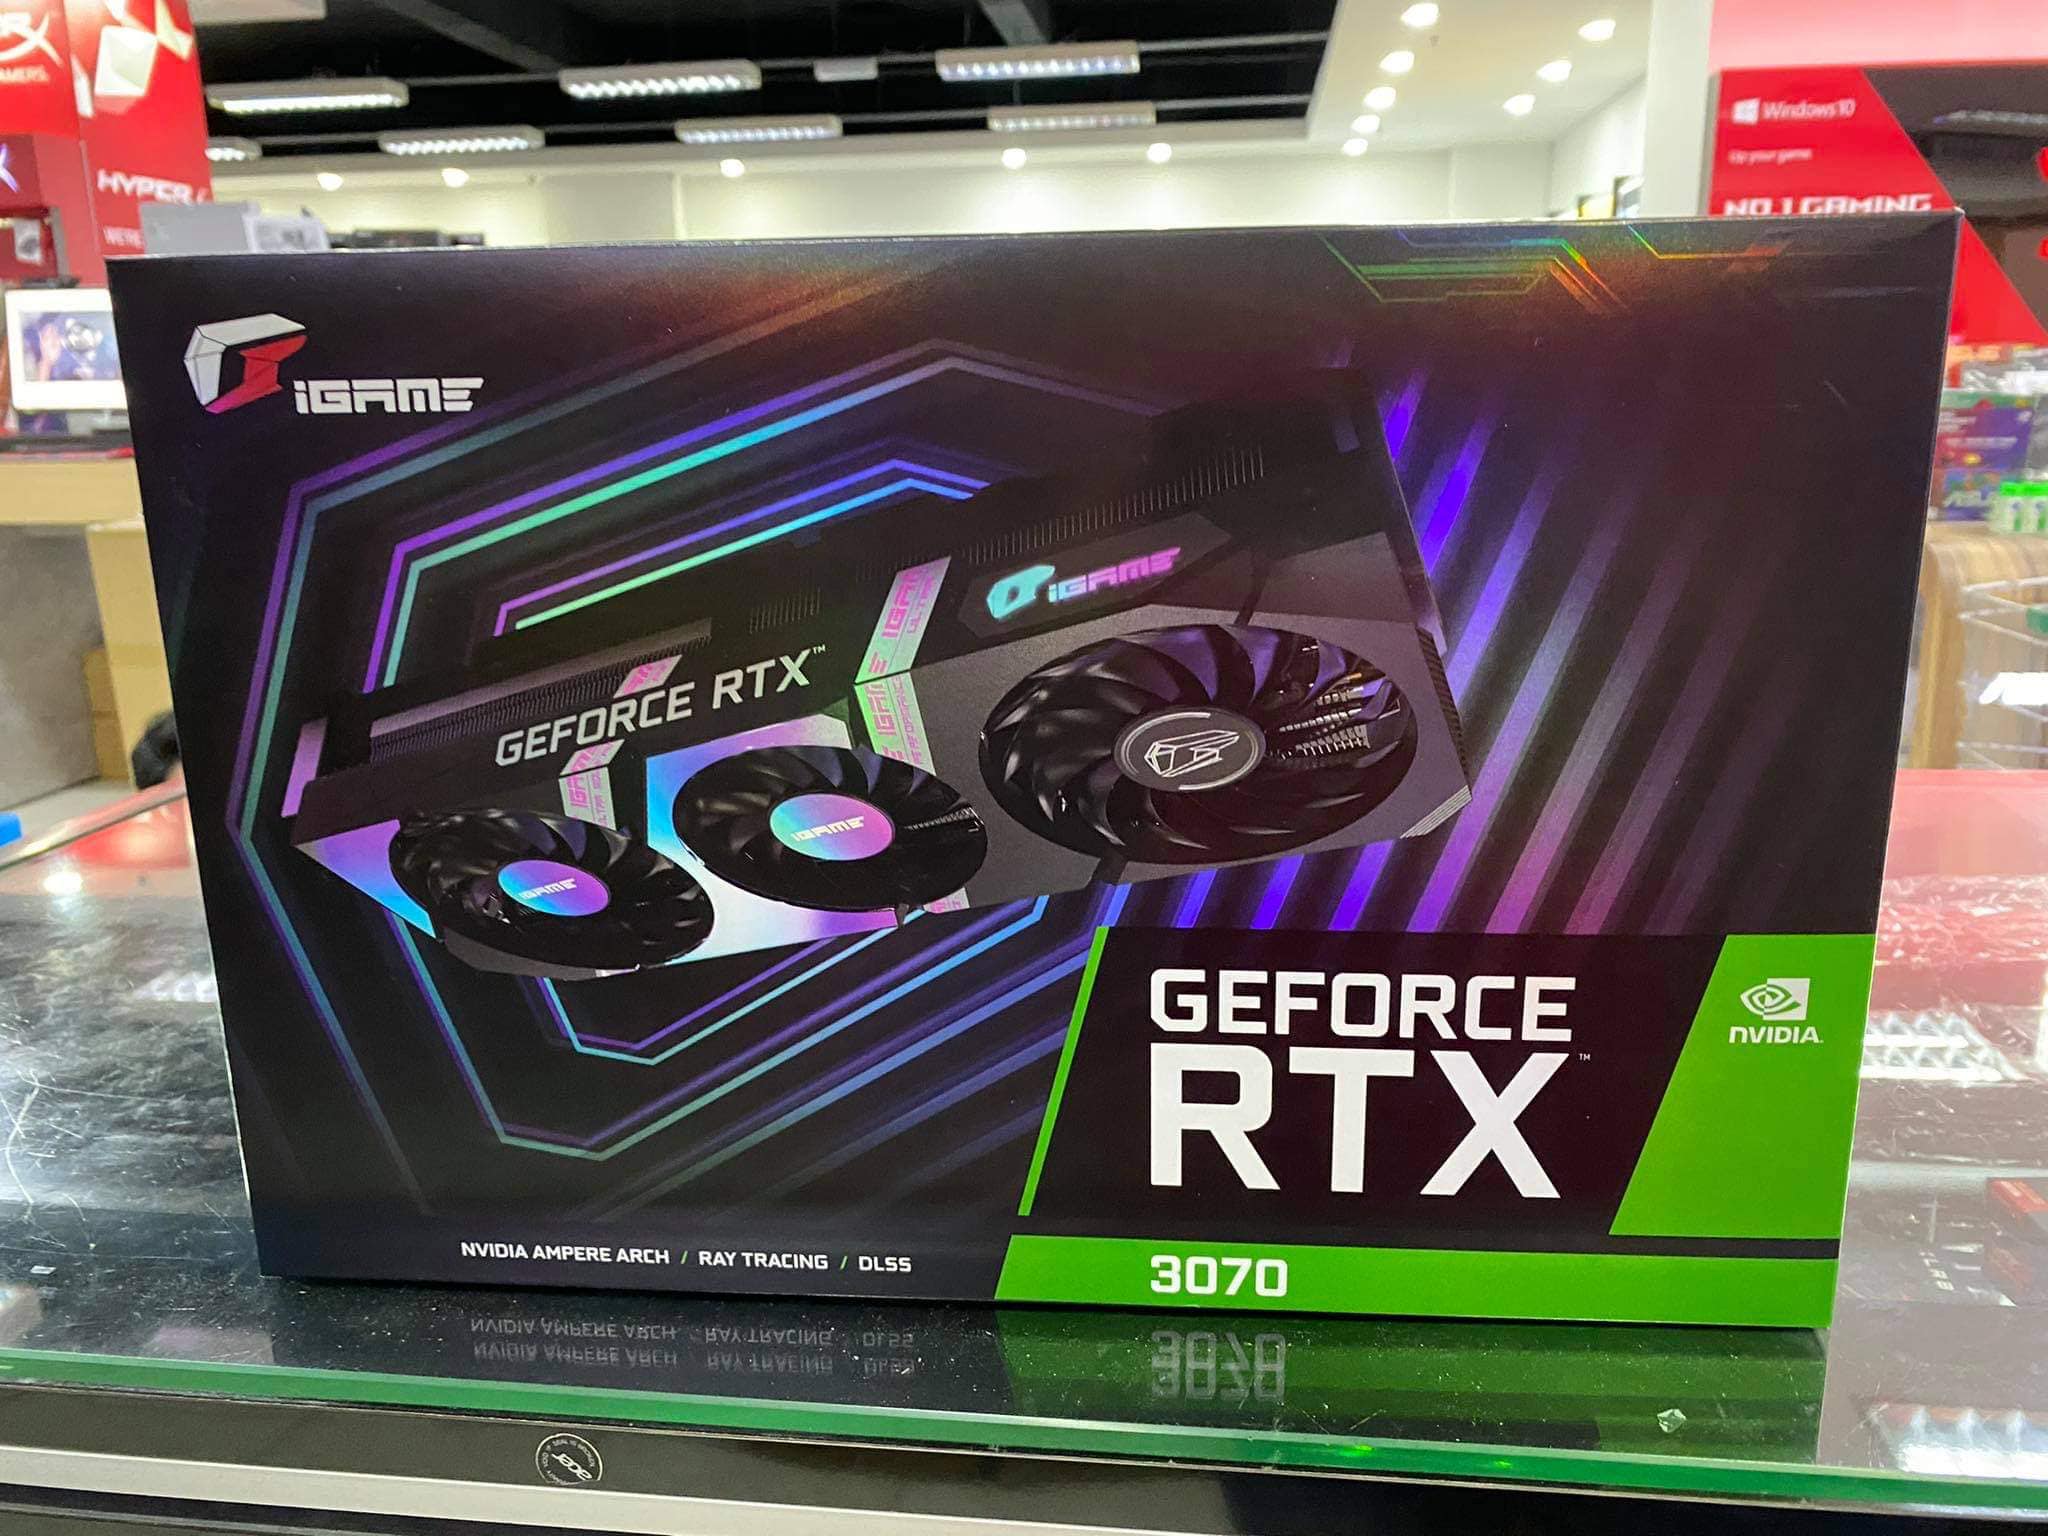 Colorful igame 3070. RTX 3070 IGAME. RTX 3070 colorful. GEFORCE RTX 3070 Ultra w OC 8g. Colorful IGAME GEFORCE RTX 3070 Ultra w OC-V 8gb.